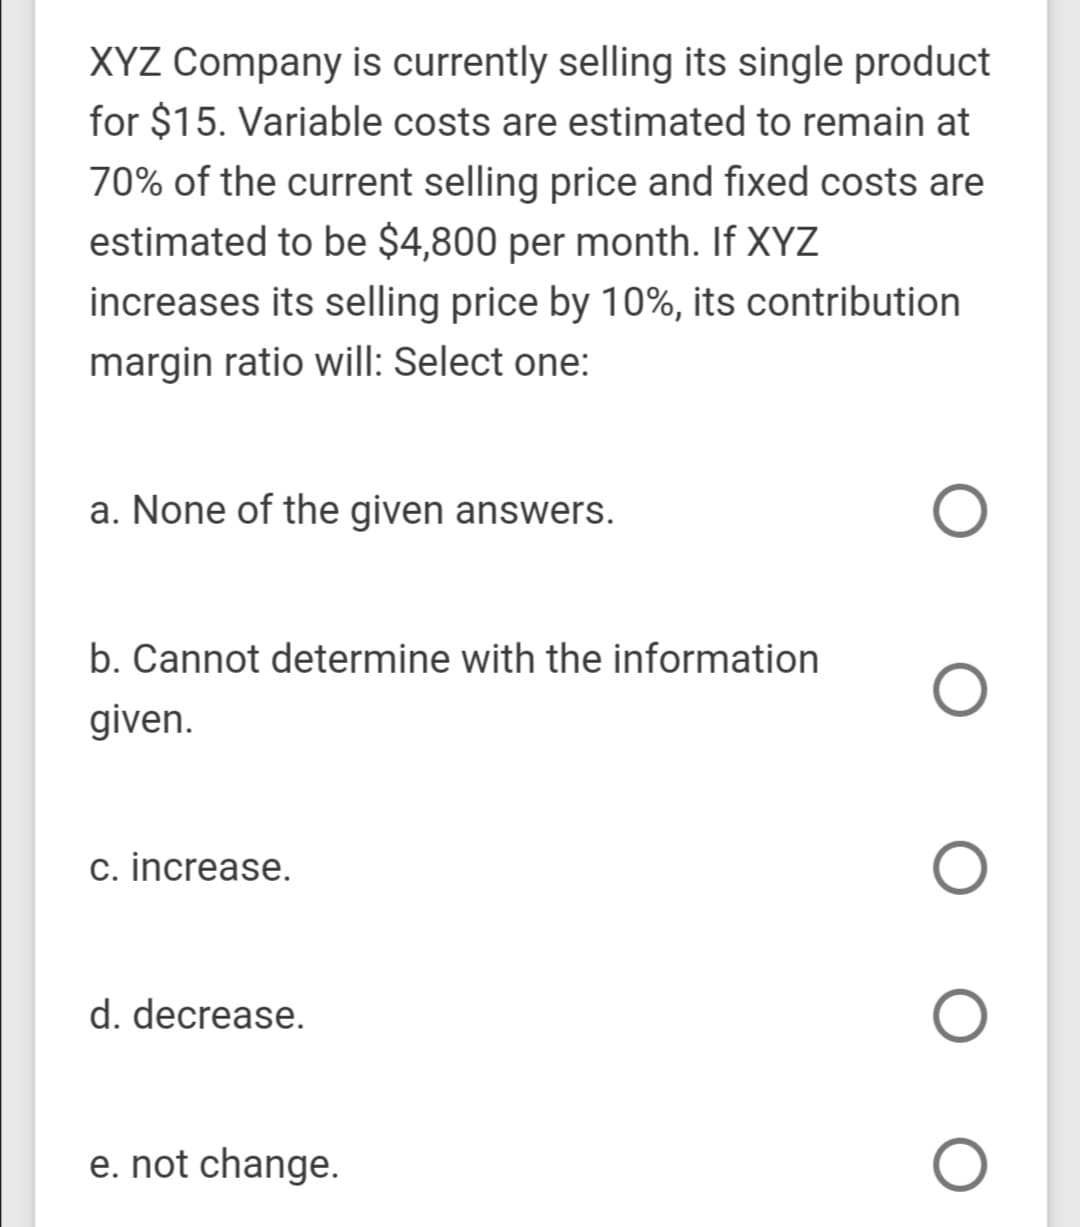 XYZ Company is currently selling its single product
for $15. Variable costs are estimated to remain at
70% of the current selling price and fixed costs are
estimated to be $4,800 per month. If XYZ
increases its selling price by 10%, its contribution
margin ratio will: Select one:
a. None of the given answers.
b. Cannot determine with the information
given.
c. increase.
d. decrease.
e. not change.
